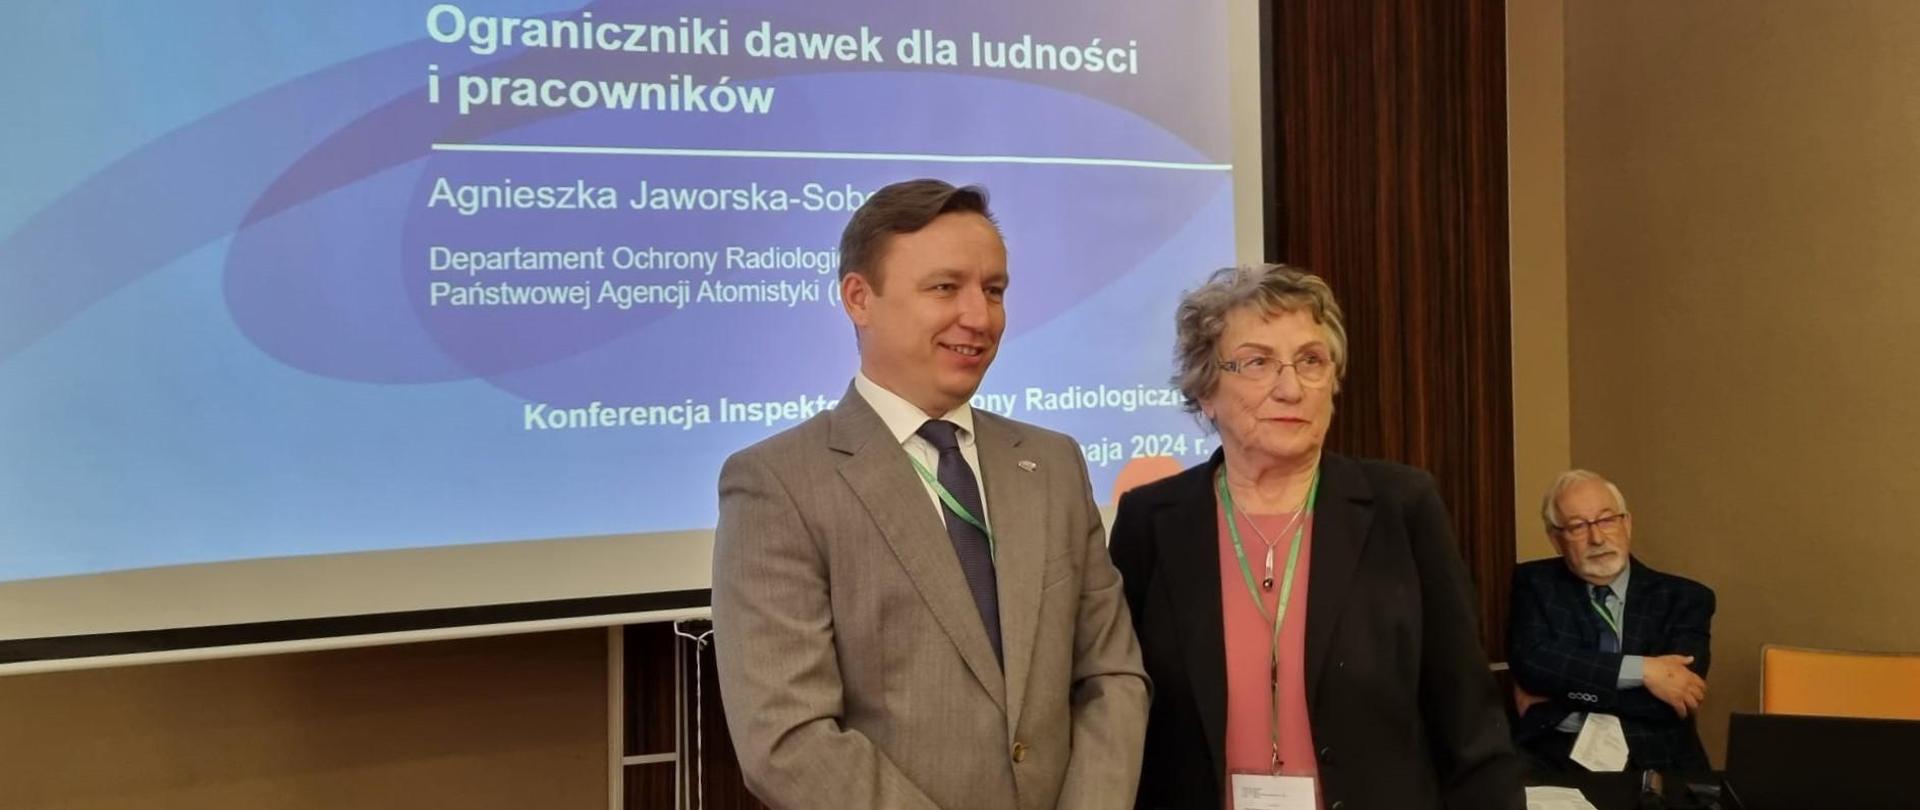 Andrzej Głowacki, President of the National Atomic Energy Agency, Maria Kubicka, President of the Association of Radiological Protection Inspectors during the SIOR Conference